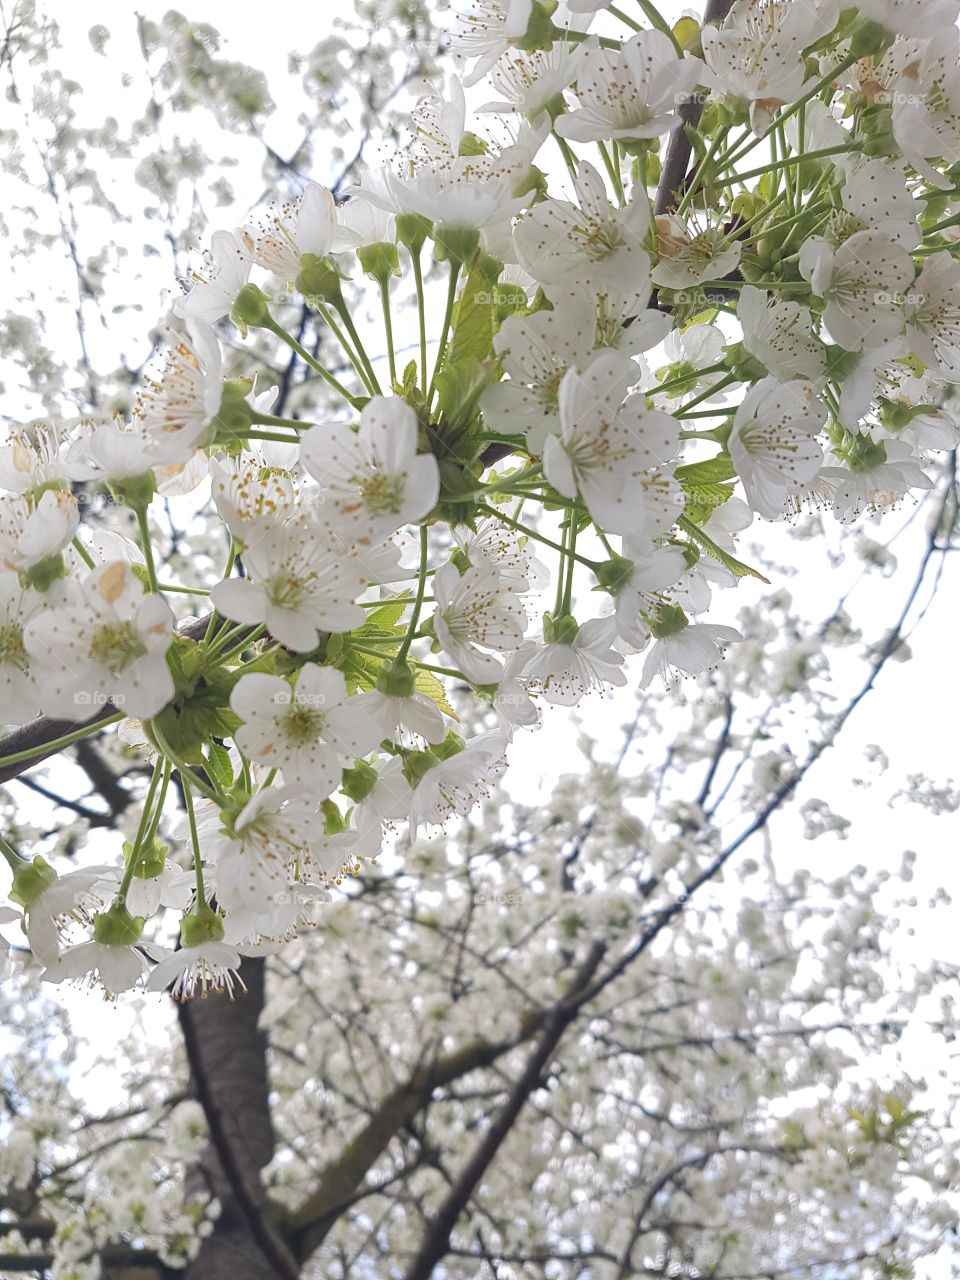 These white blossoms says that cherry is on it’s way to come.